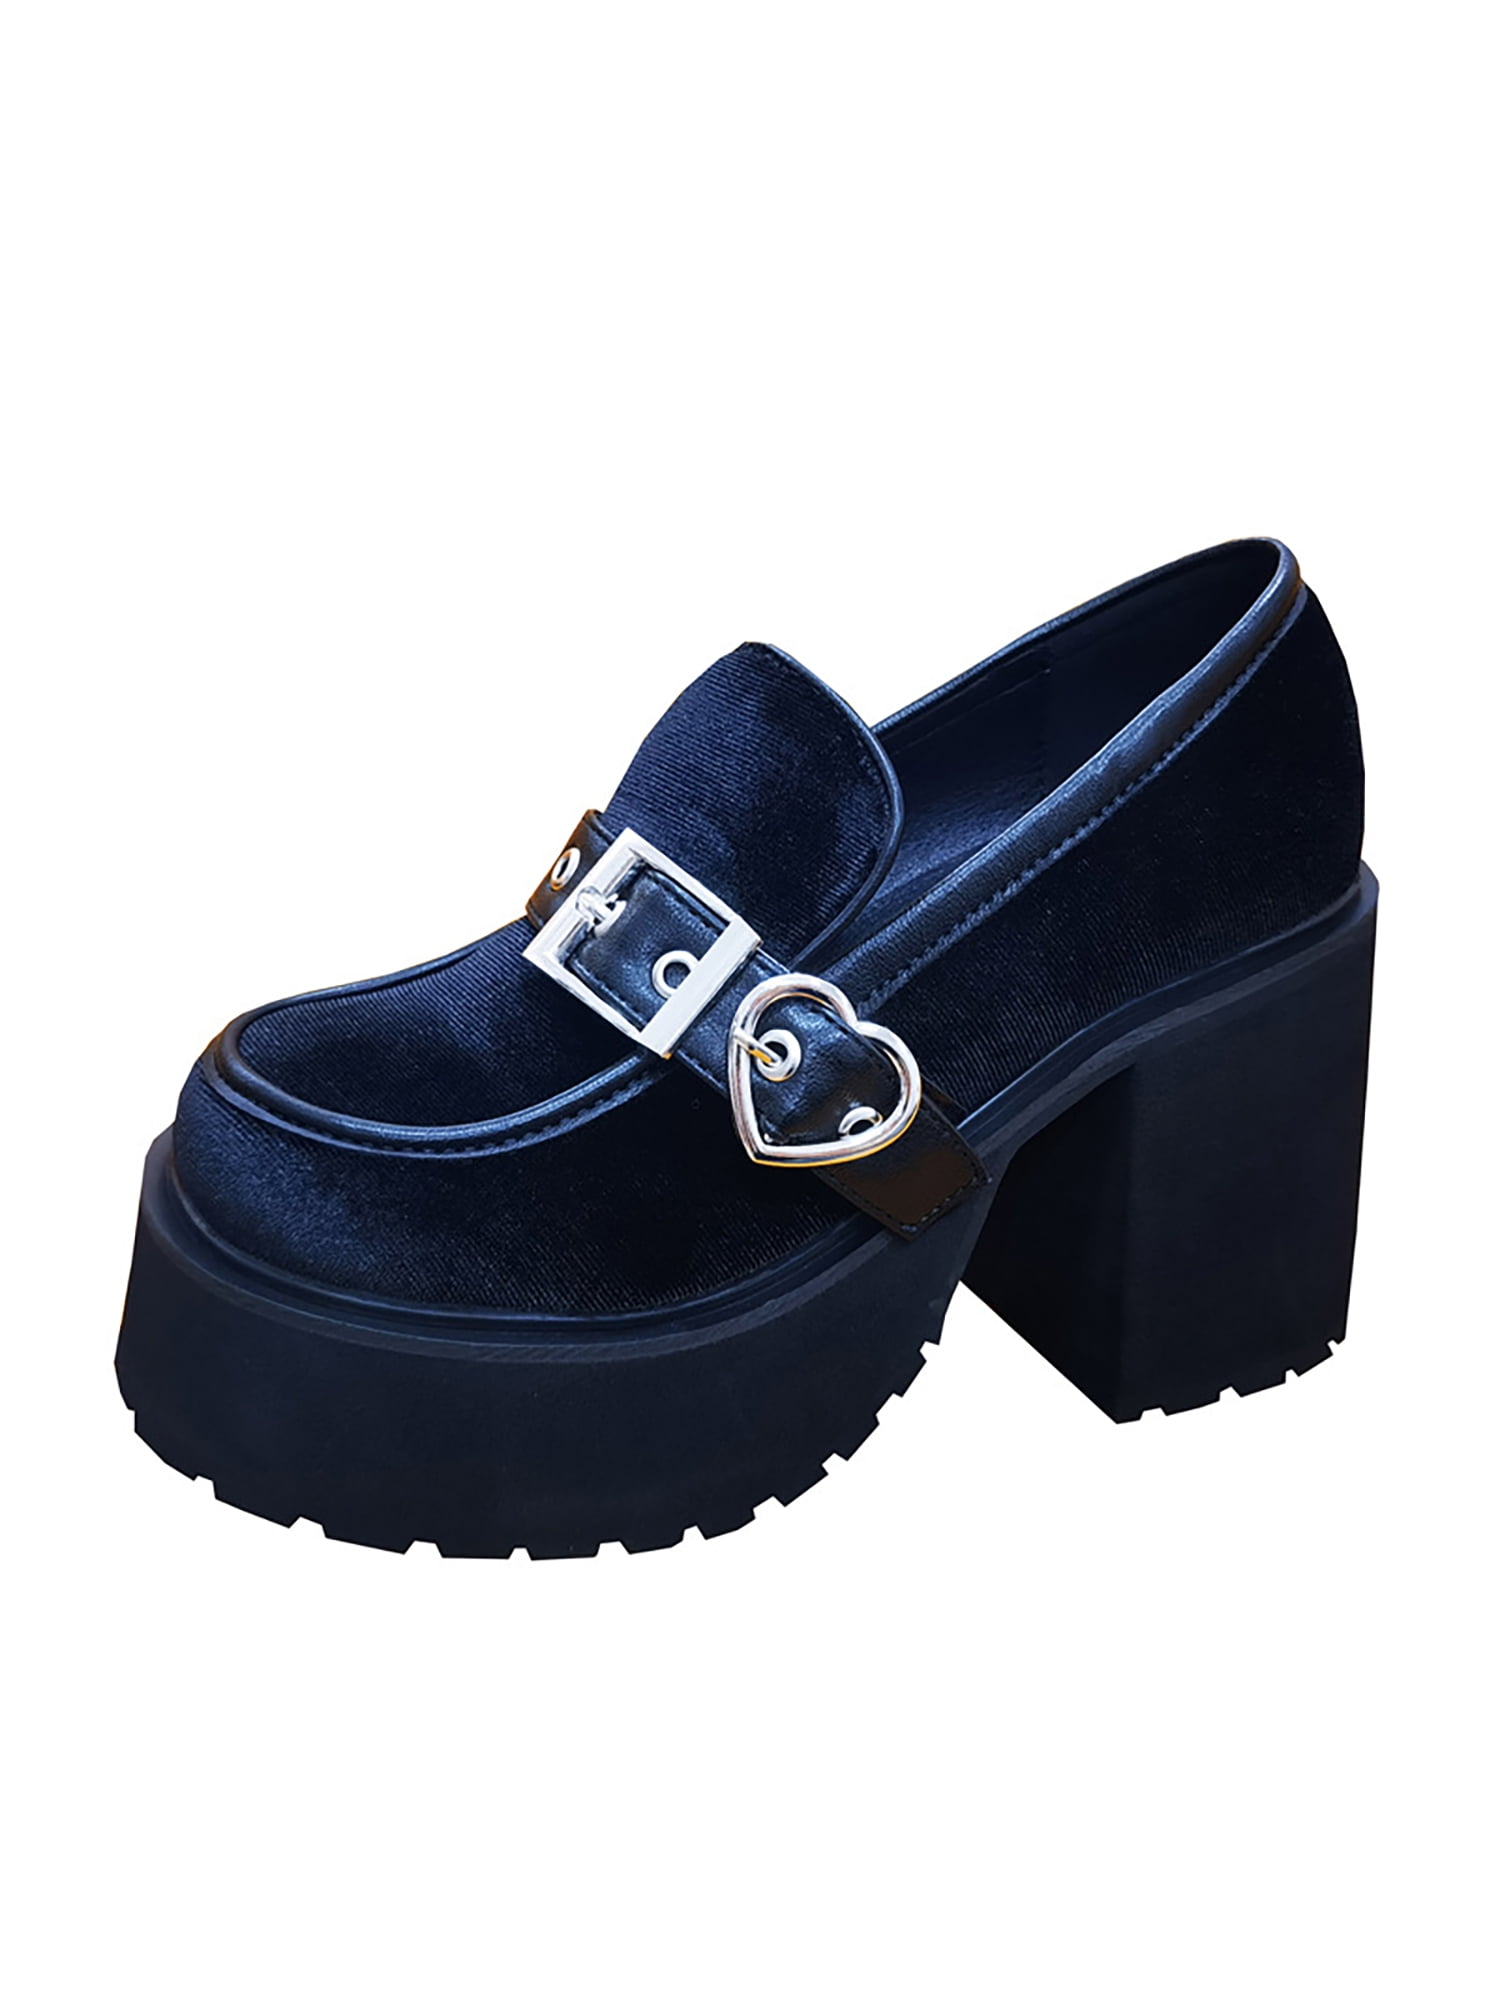 TULAR - Women's chunky heels & platforms leather moccasins